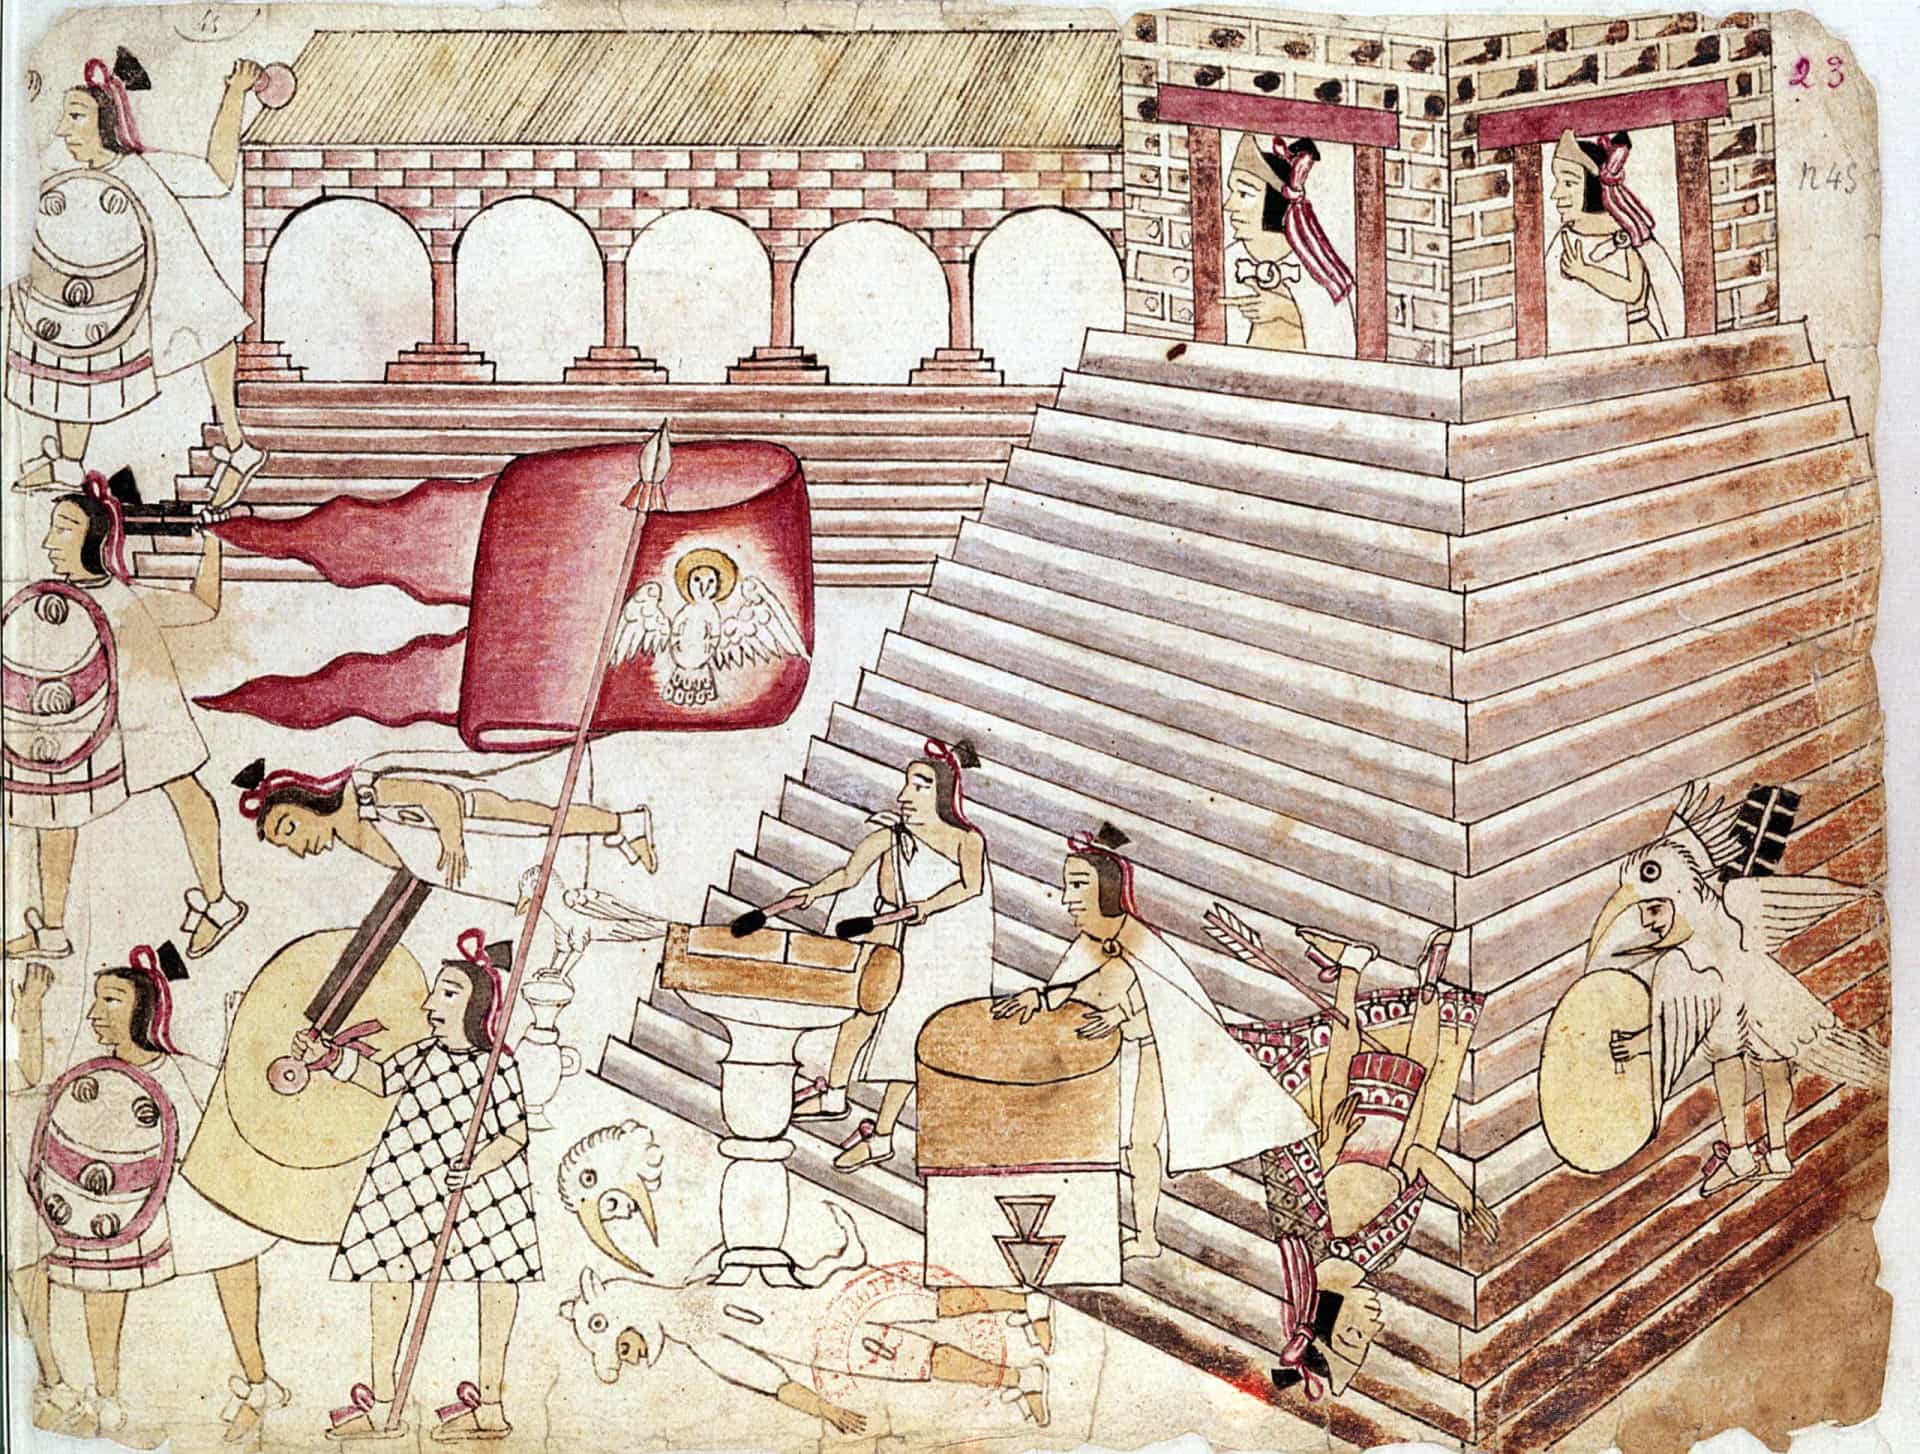 Impressive facts about the Aztec Empire